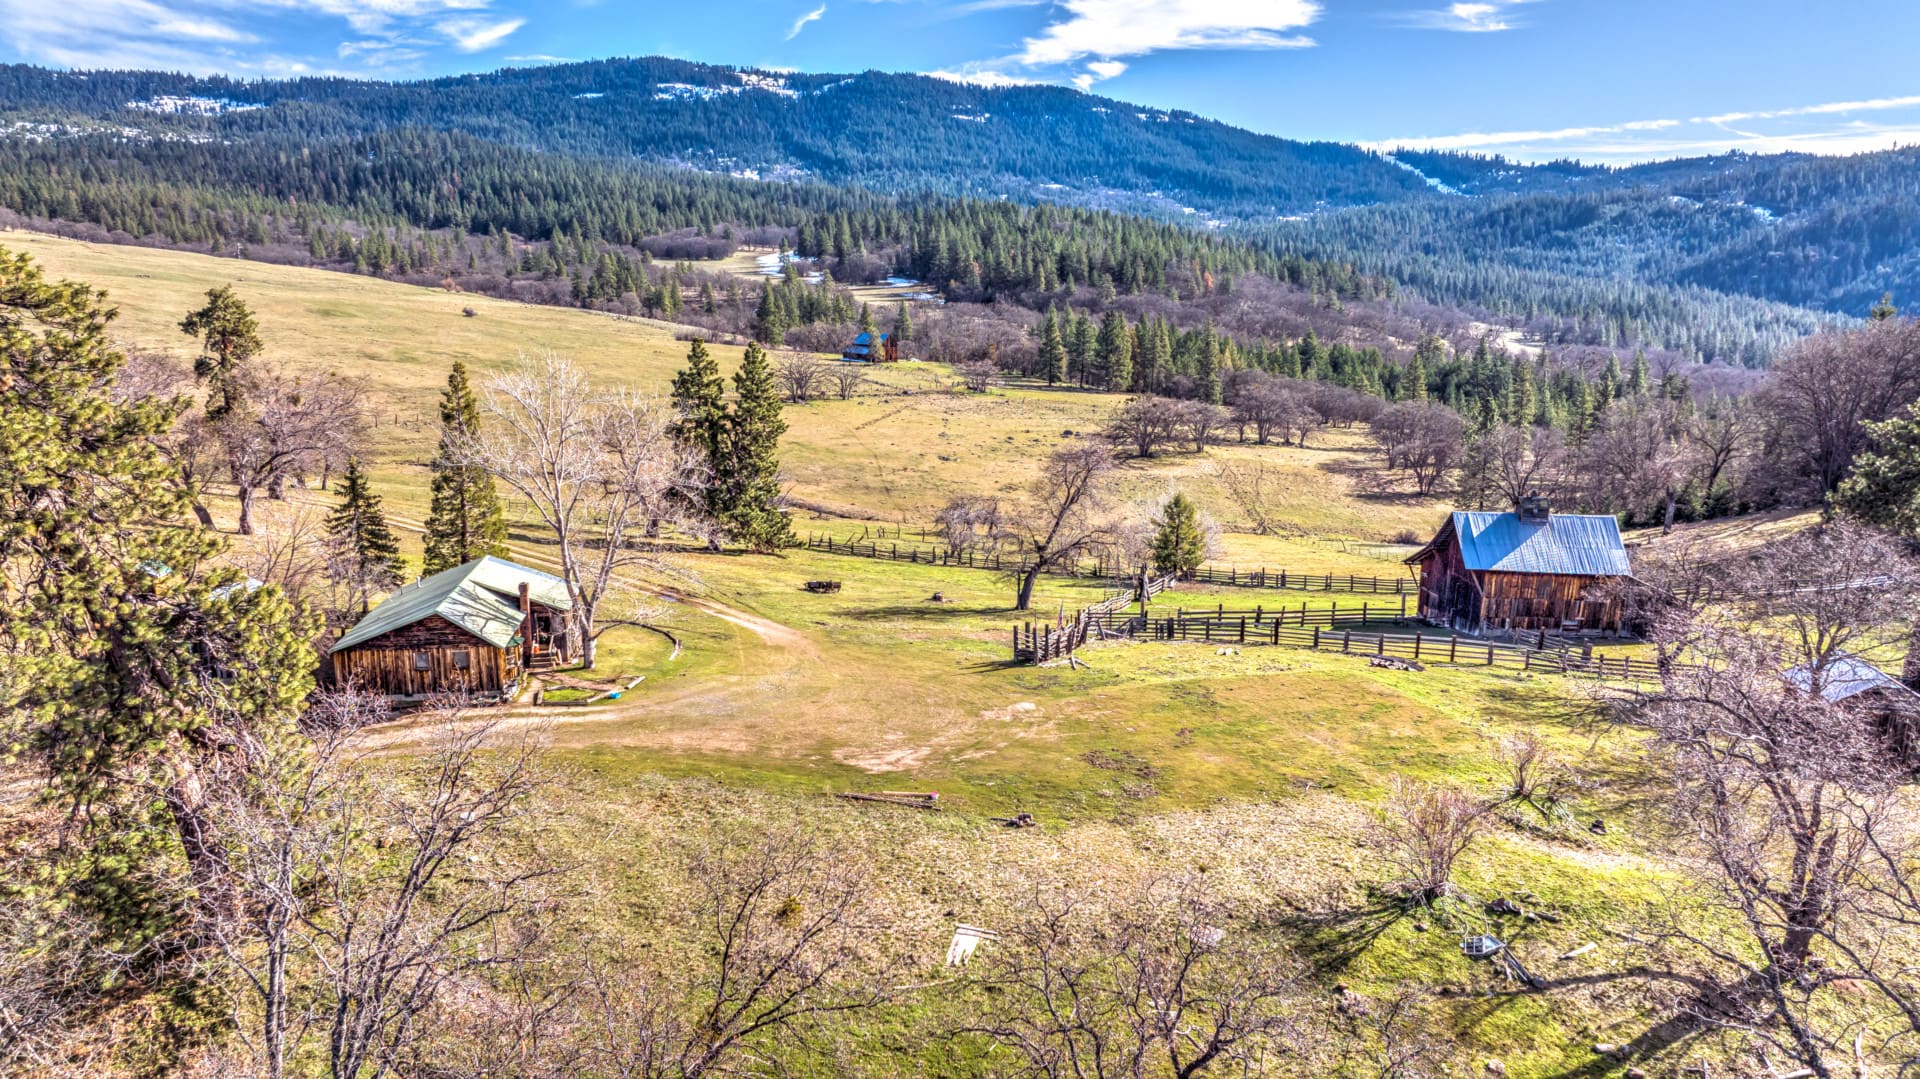 secluded ranch for sale oregon the legend of cove creek ranch